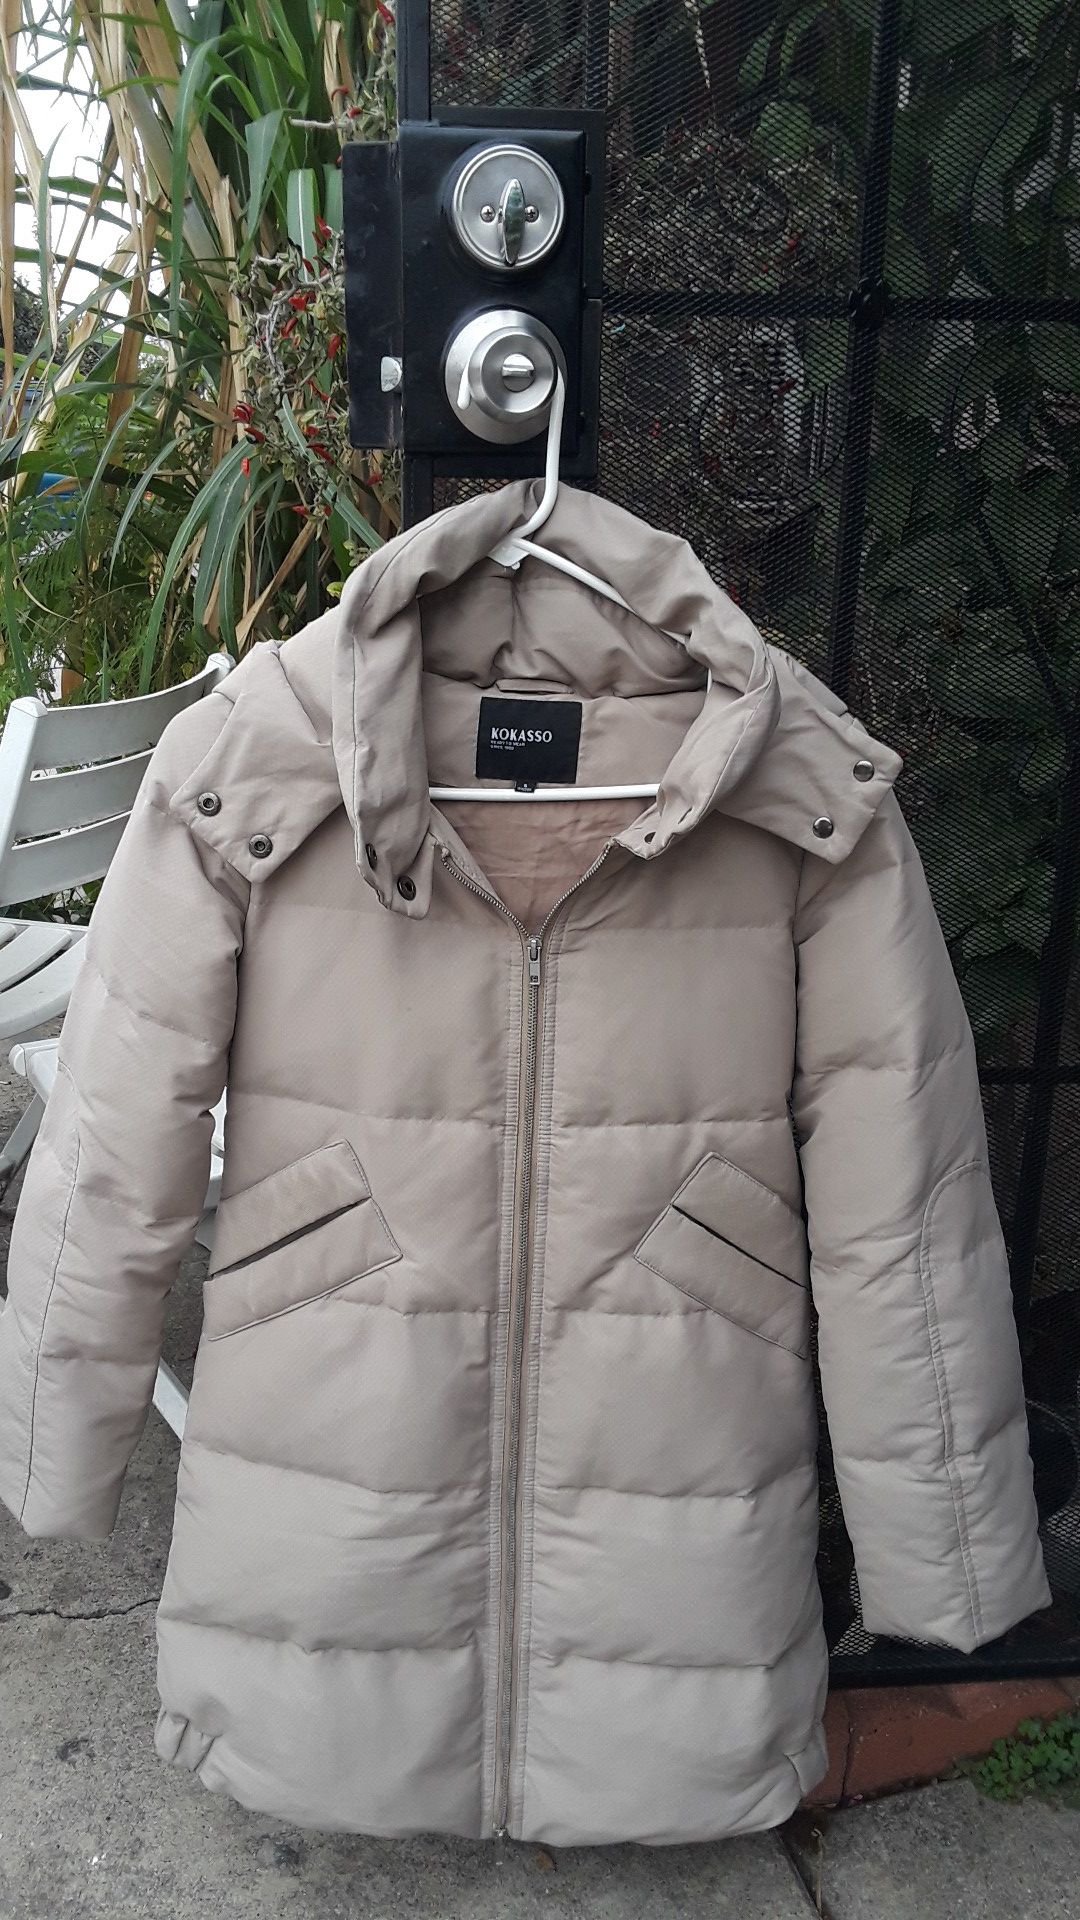 Parka Jacket. KOKASSO brand, look it up sells for $350.00, dark beige size Small, my daughter used it 3 times only last year, doesn't fit her anymore.